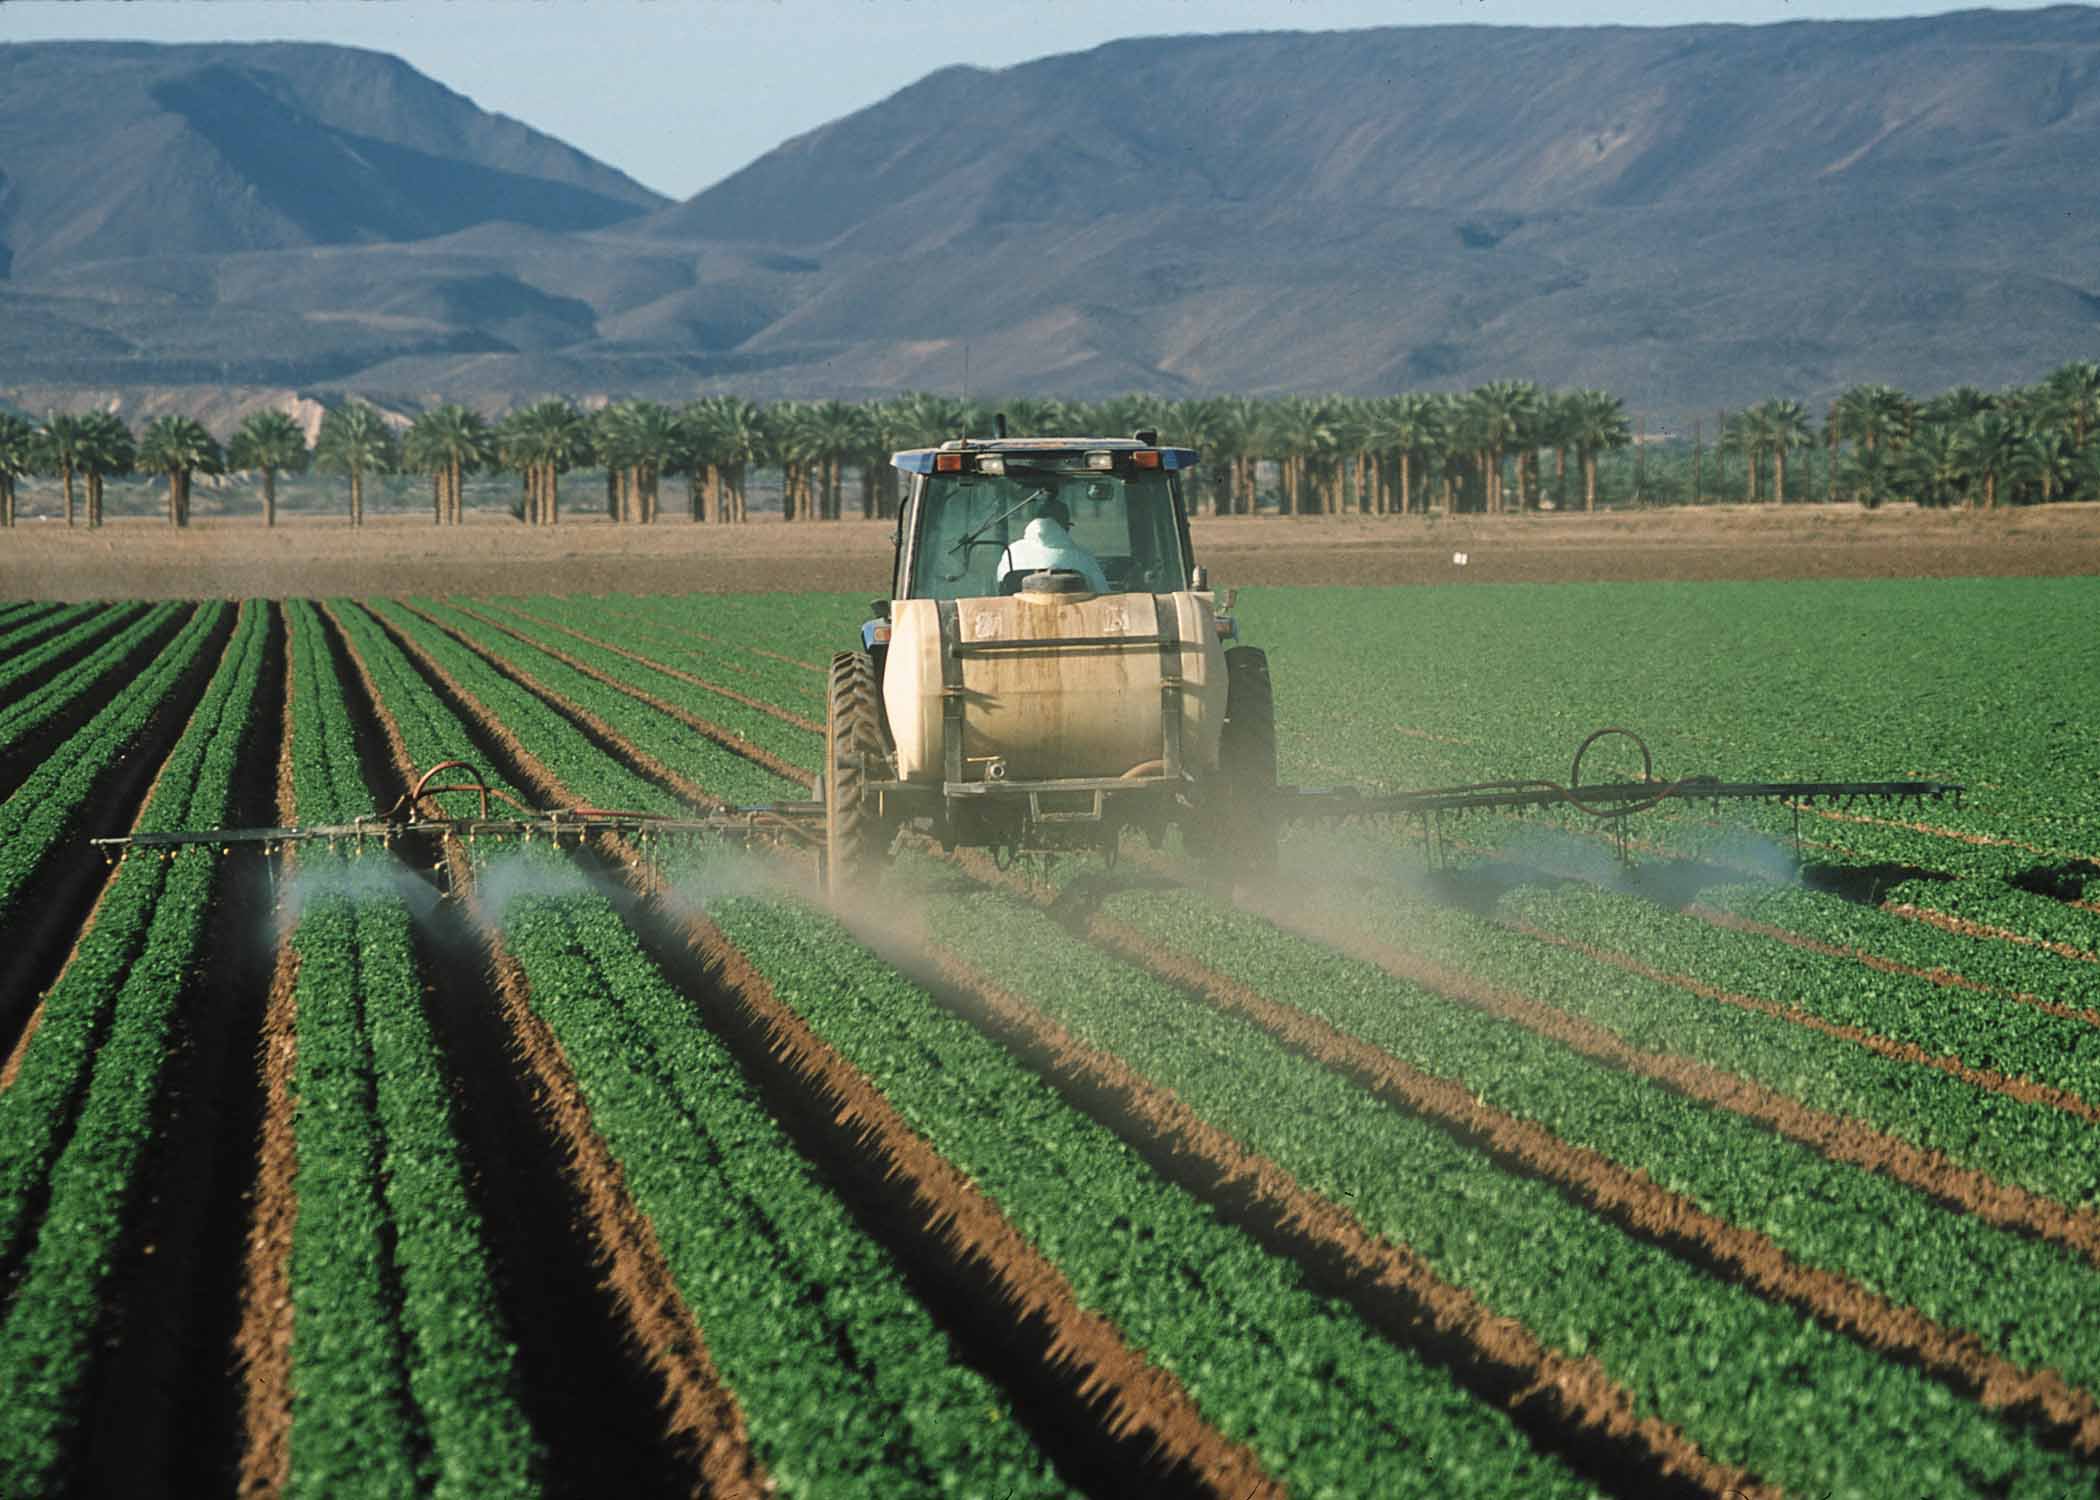 A tractor being driven by a man spraying chemcial pesticides on a farm field